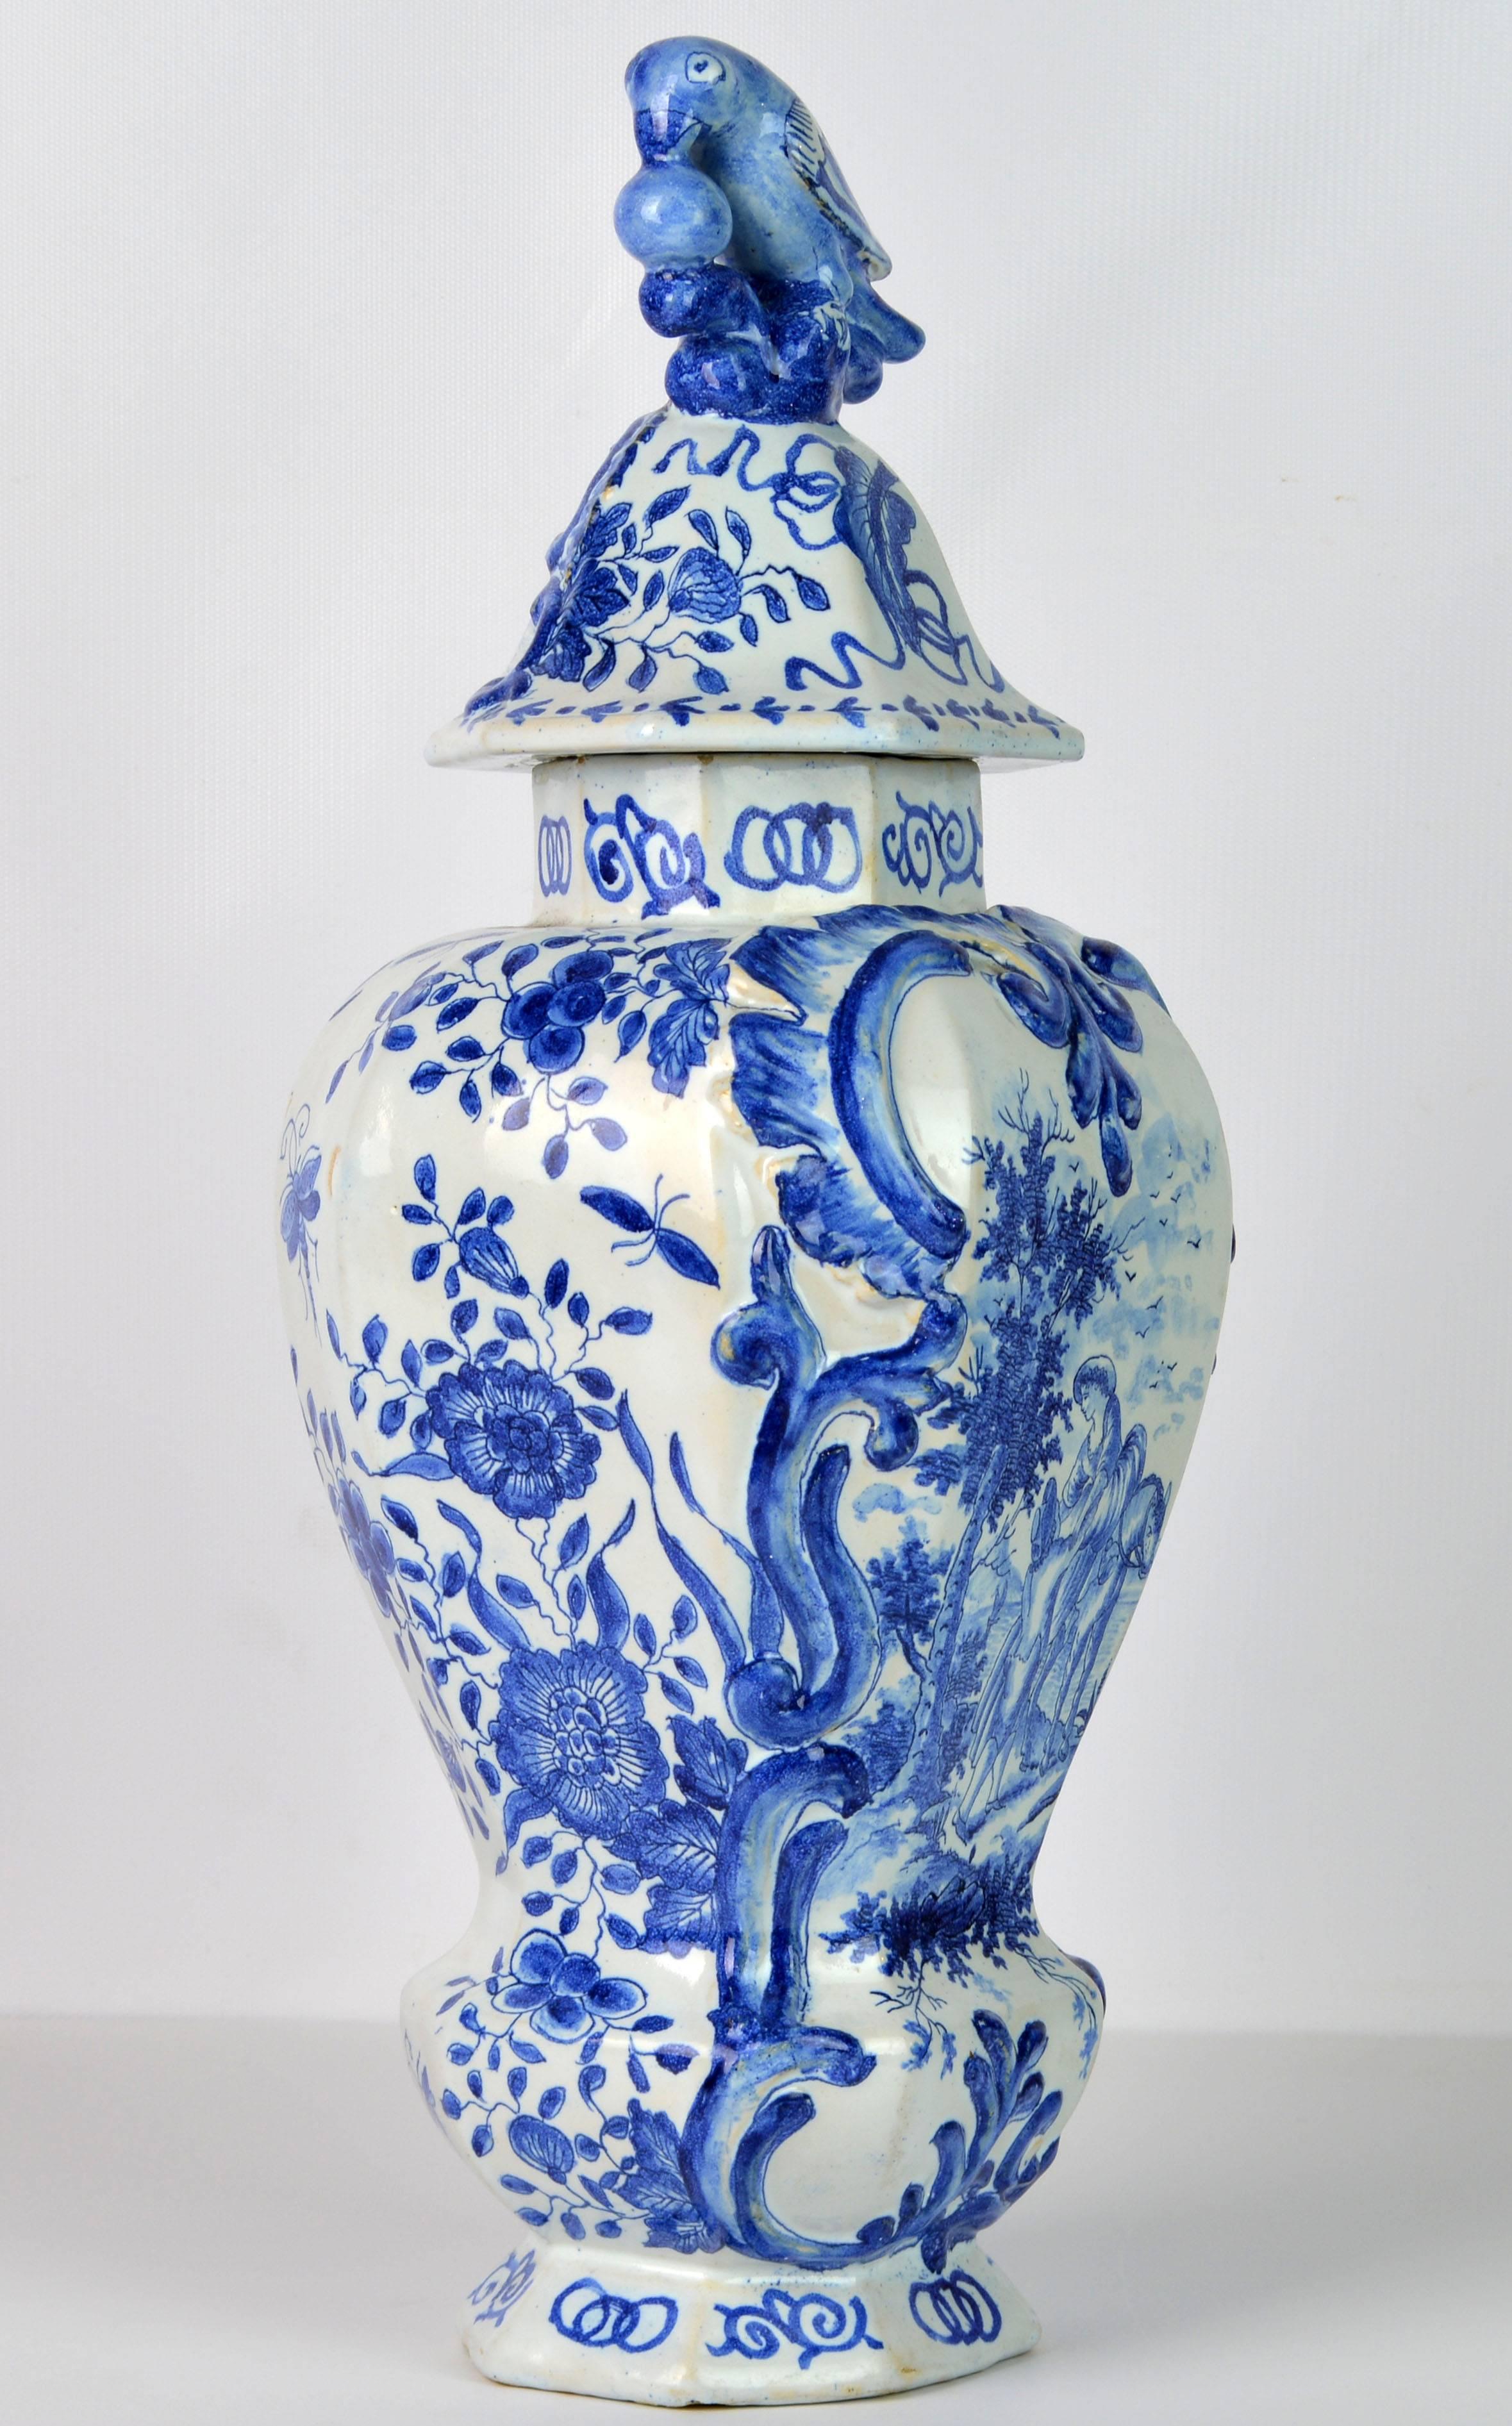 Standing 18 inches tall this lovely delft pottery jar features an octagonal cover with a bird and a berry on top above the main baluster shape octagonal body decorated with a landscape cartouche with people and a horse surrounded by flowers and leaf